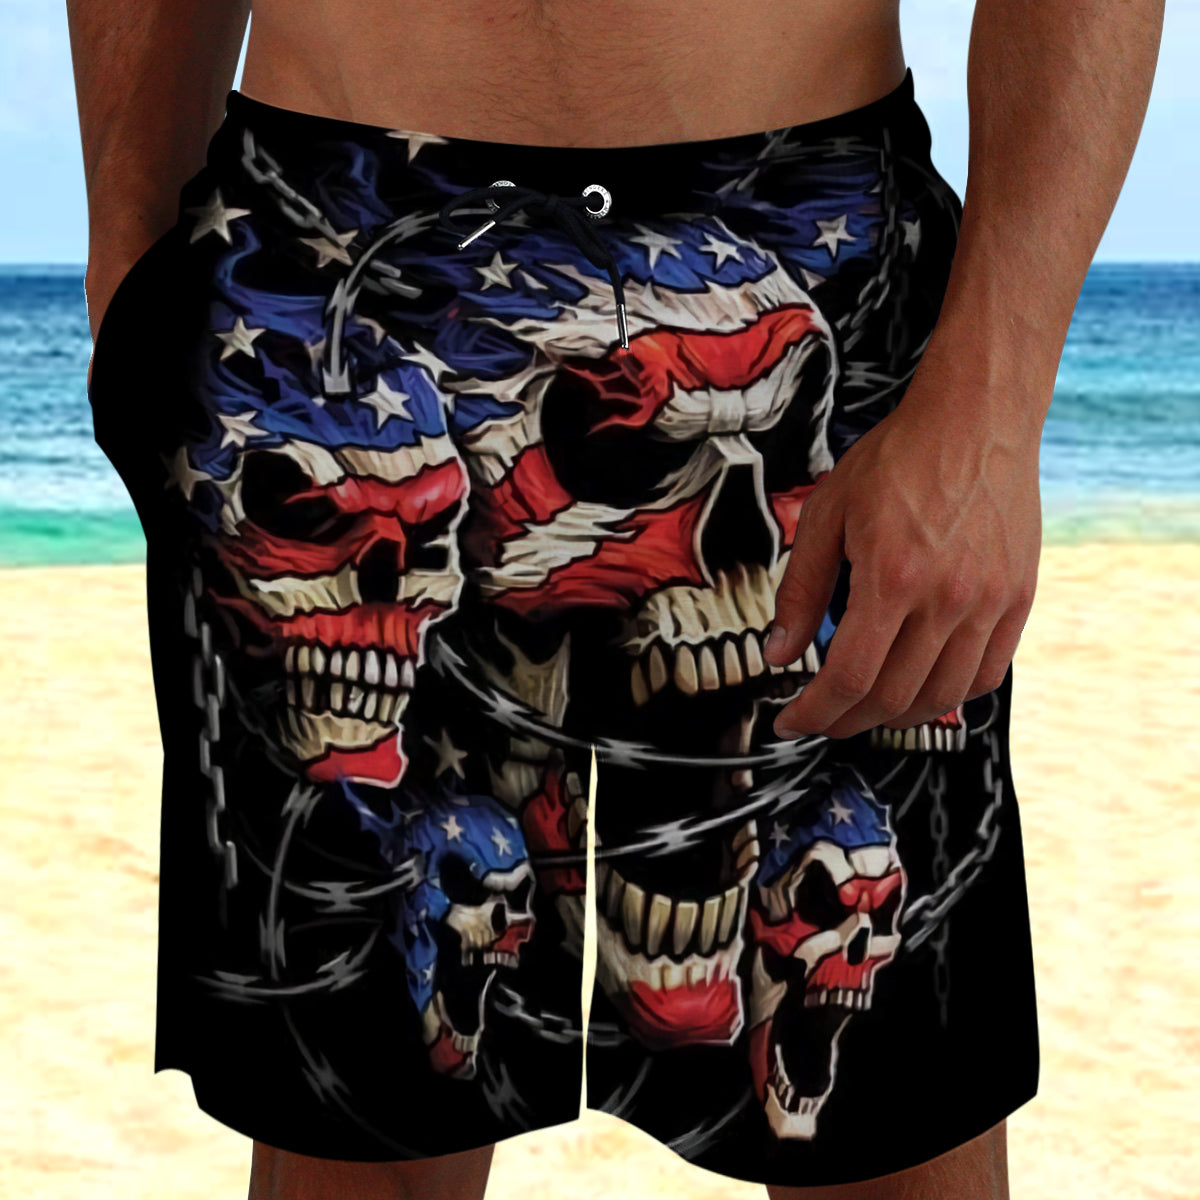 Skull With American Flag Shorts 09100